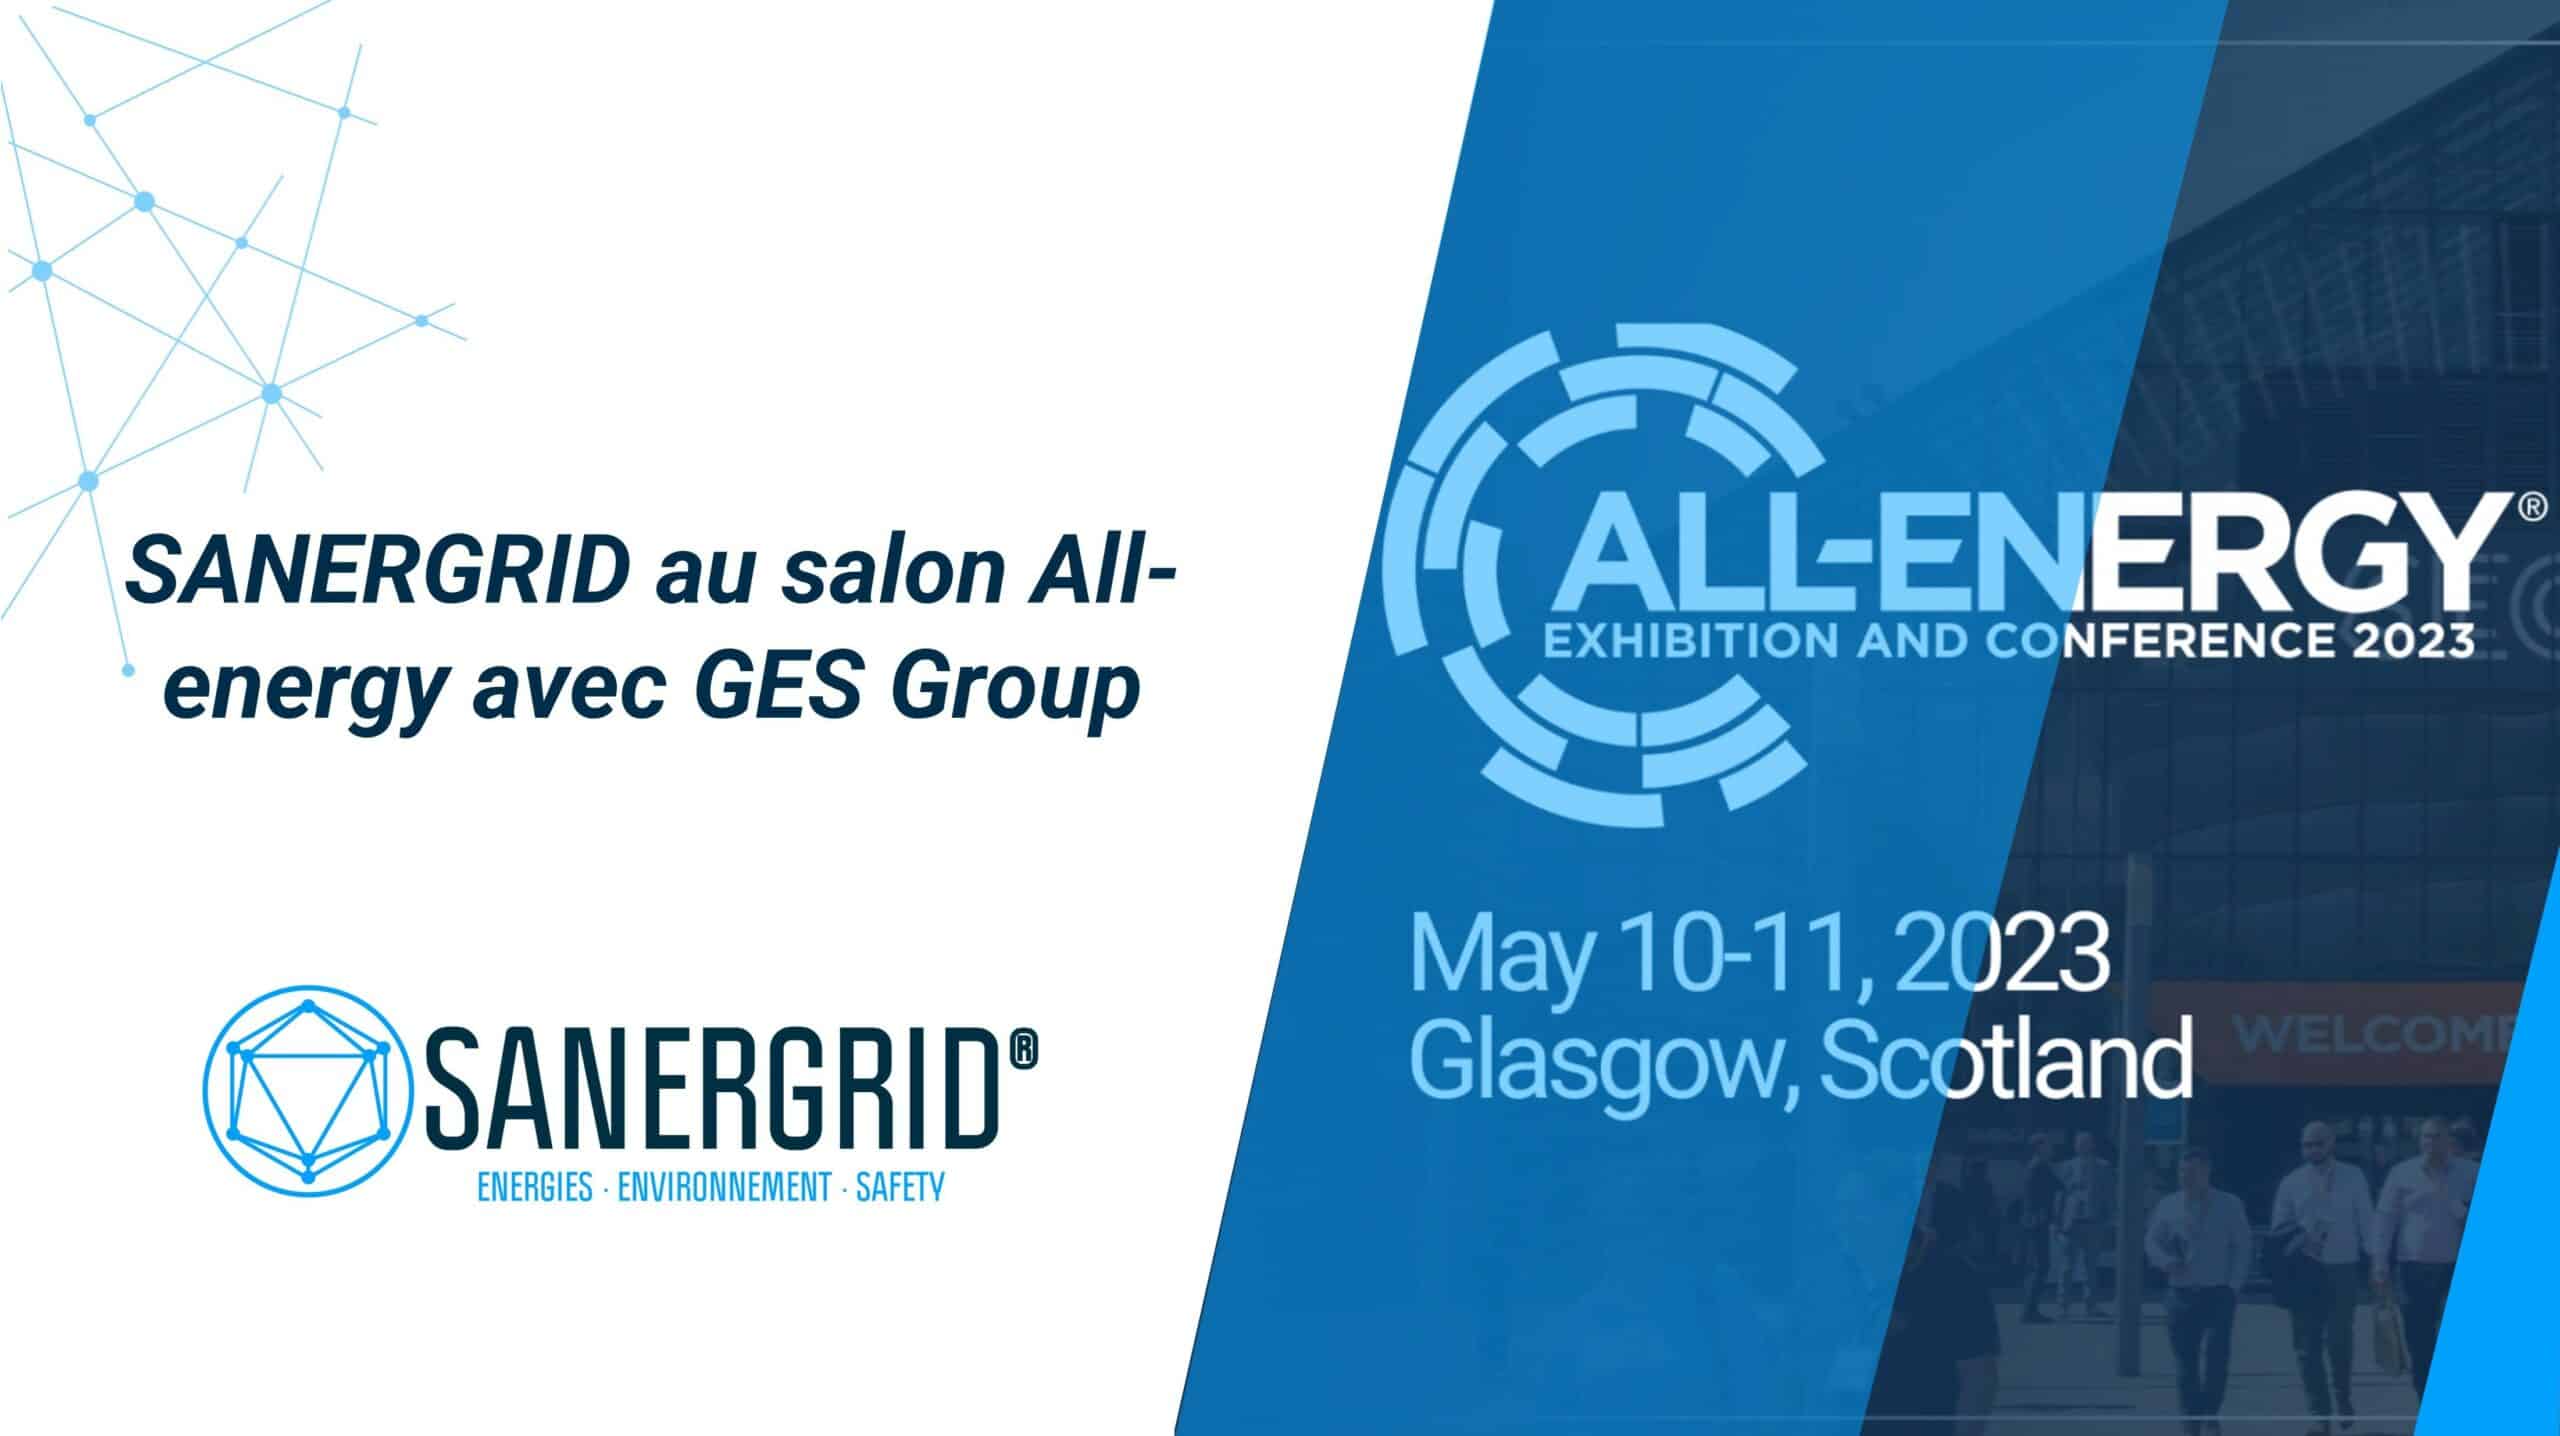 Sanergrid and Synerdis to exhibit at the All-Energy Exhibition and Conference